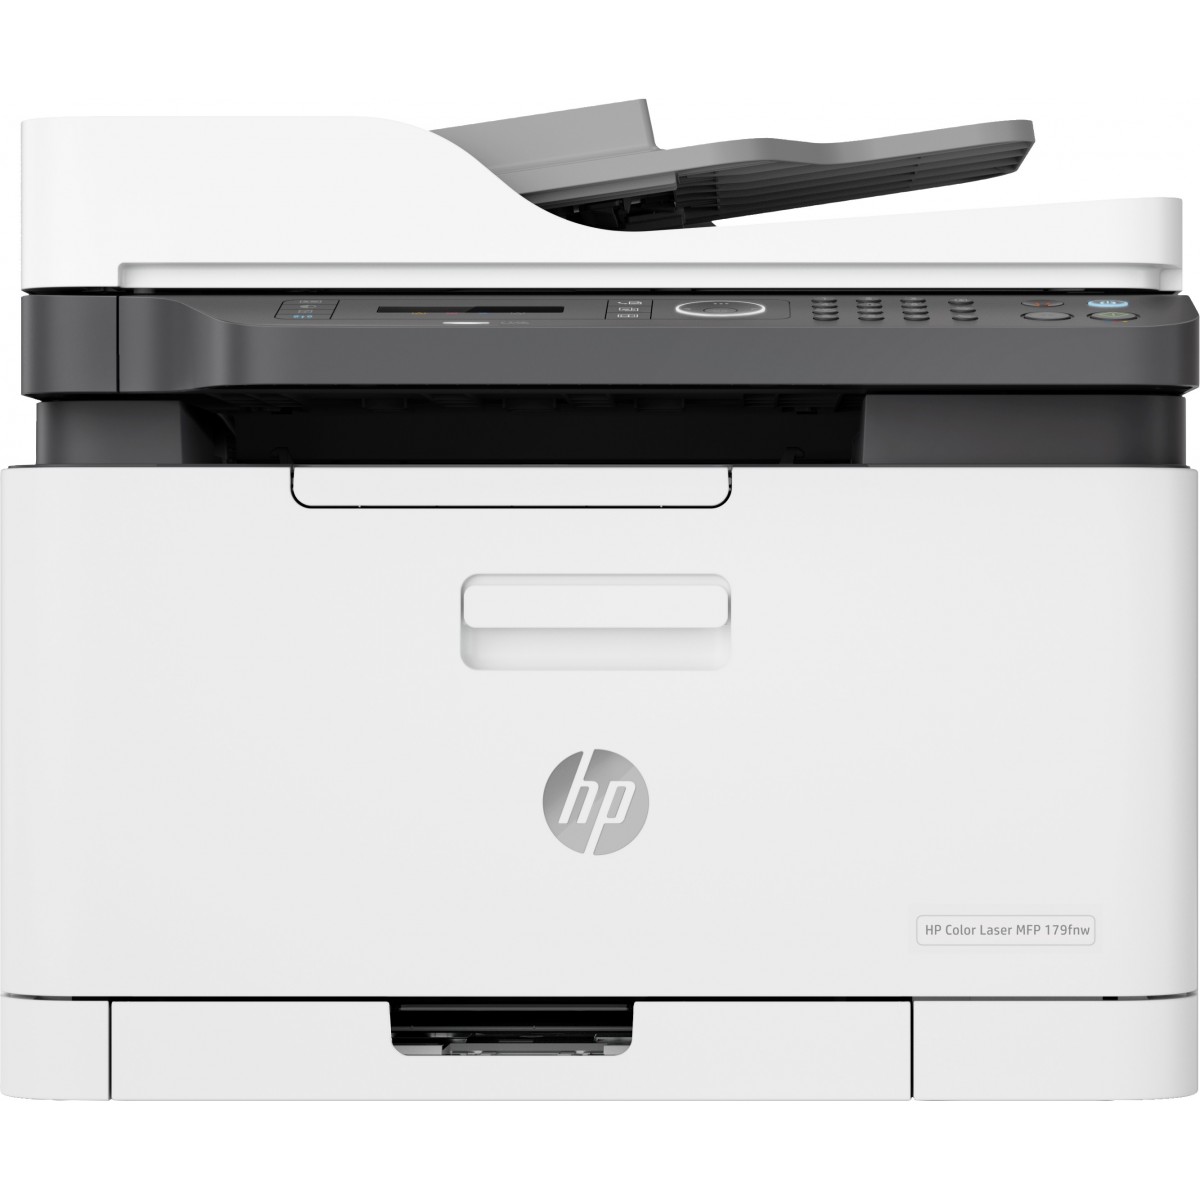 HP Color Laser 179fnw - Laser - Colour printing - 600 x 600 DPI - A4 - Direct printing - Black - White